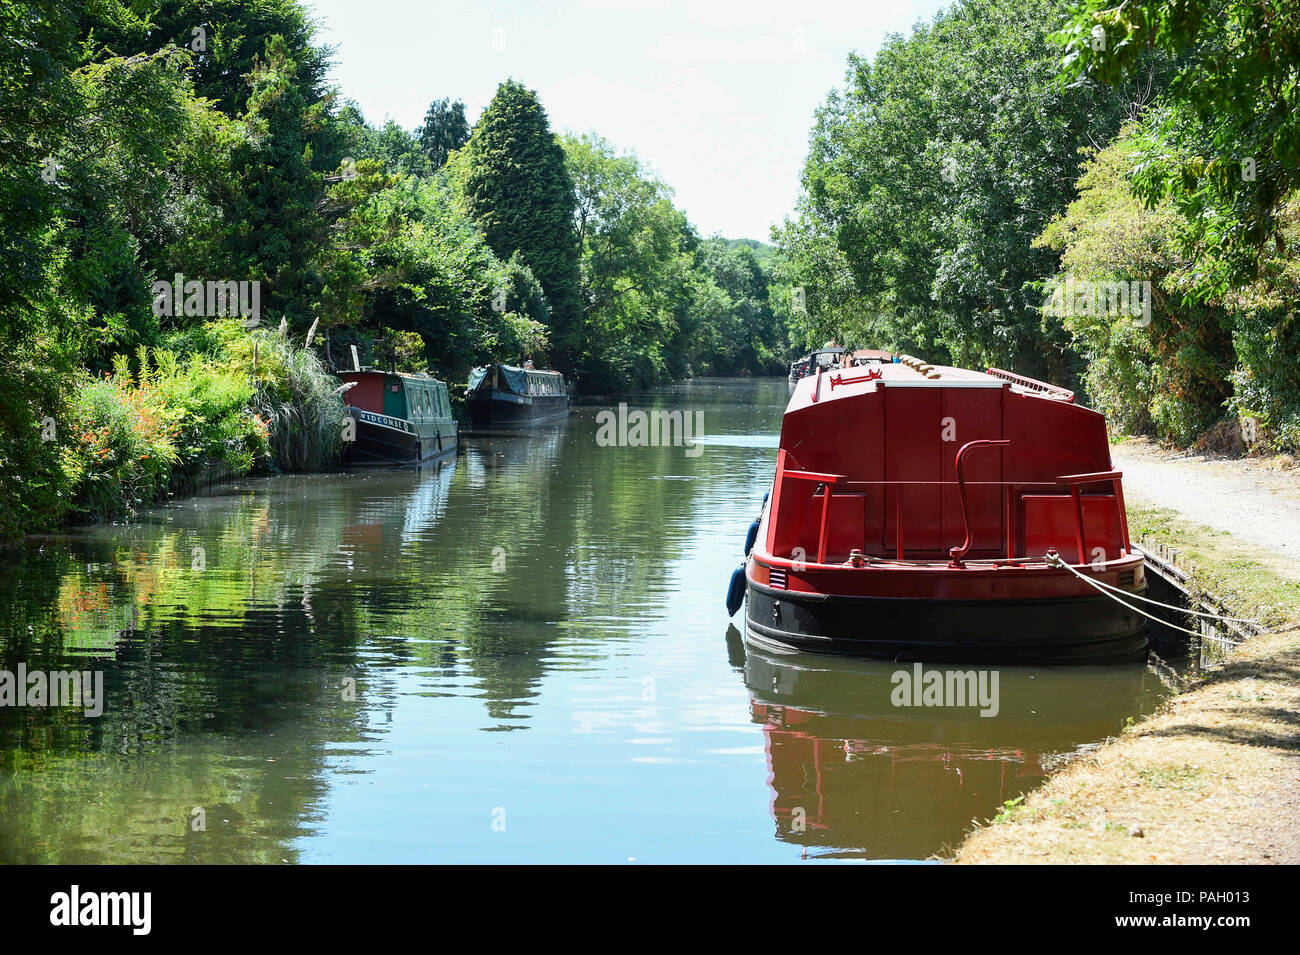 London, UK.  23 June 2018. Canal boats near Rickmansworth Aquadrome in north west London, on a day when temperatures reached 30C.  Temperatures up to 35C are forecast for the rest of the week during the current heatwave. Credit: Stephen Chung / Alamy Live News Stock Photo